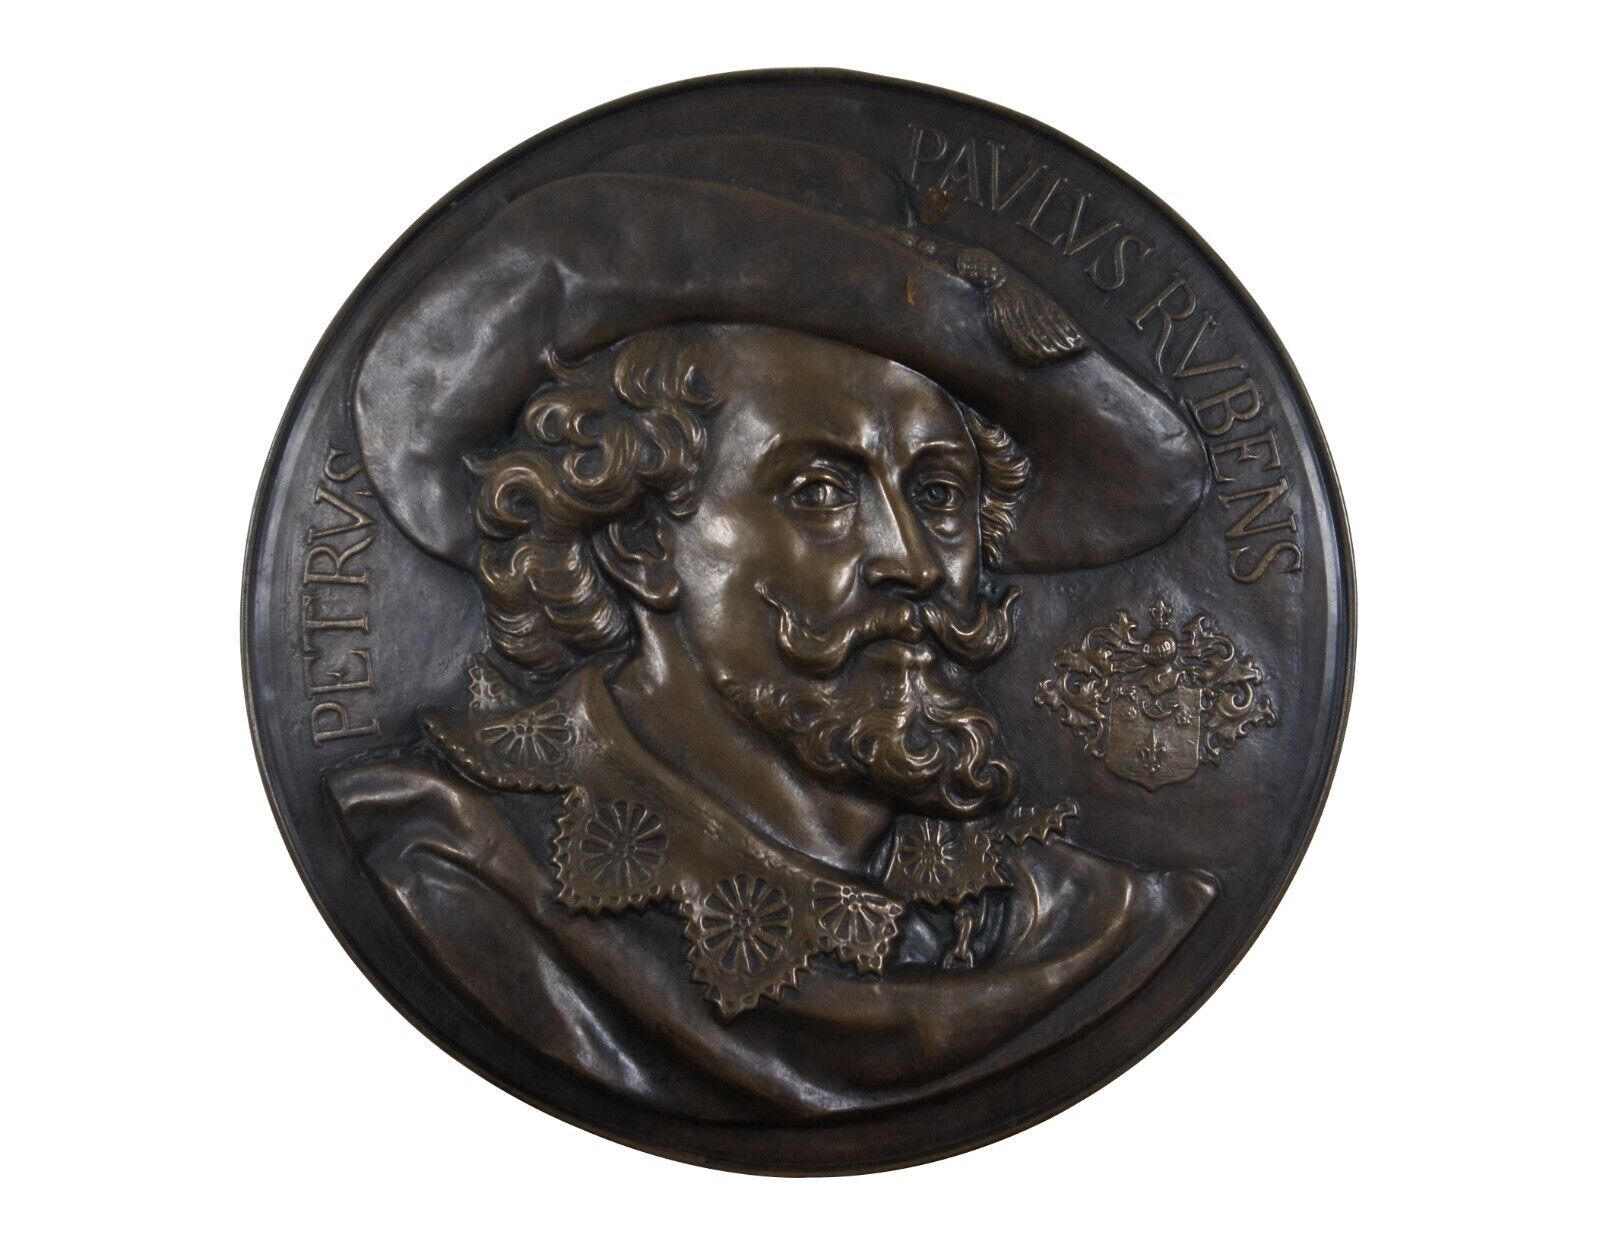 Antique Peter Paul Rubens Copper Embossed High Relief Wall Plaque Medallion 25